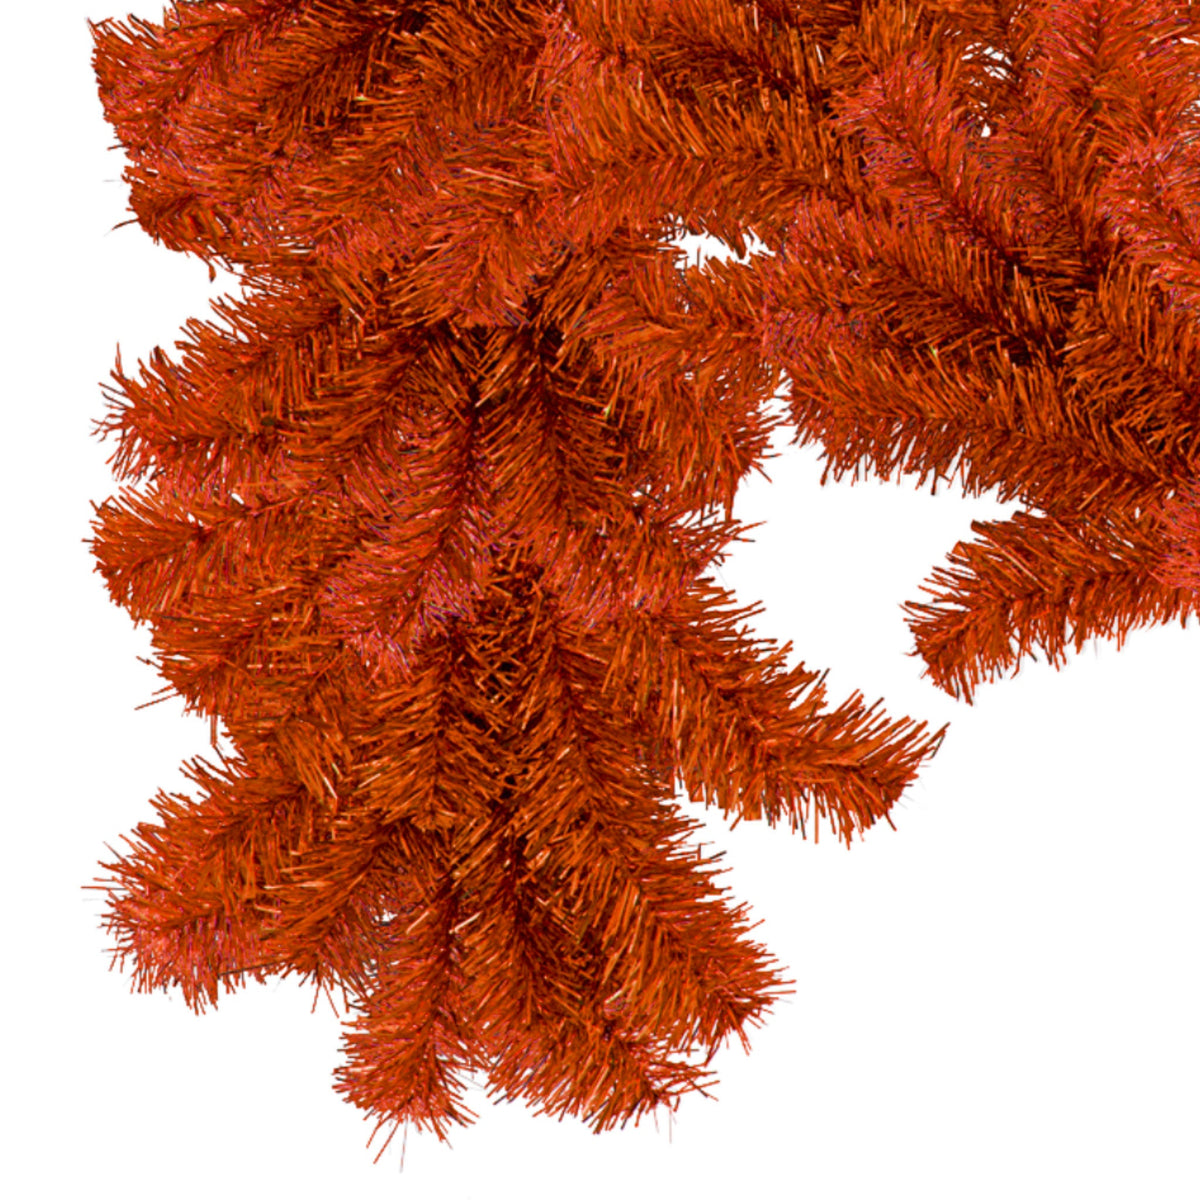 Metallic Shiny Orange Brush Garlands come in 6ft lengths from Lee Display